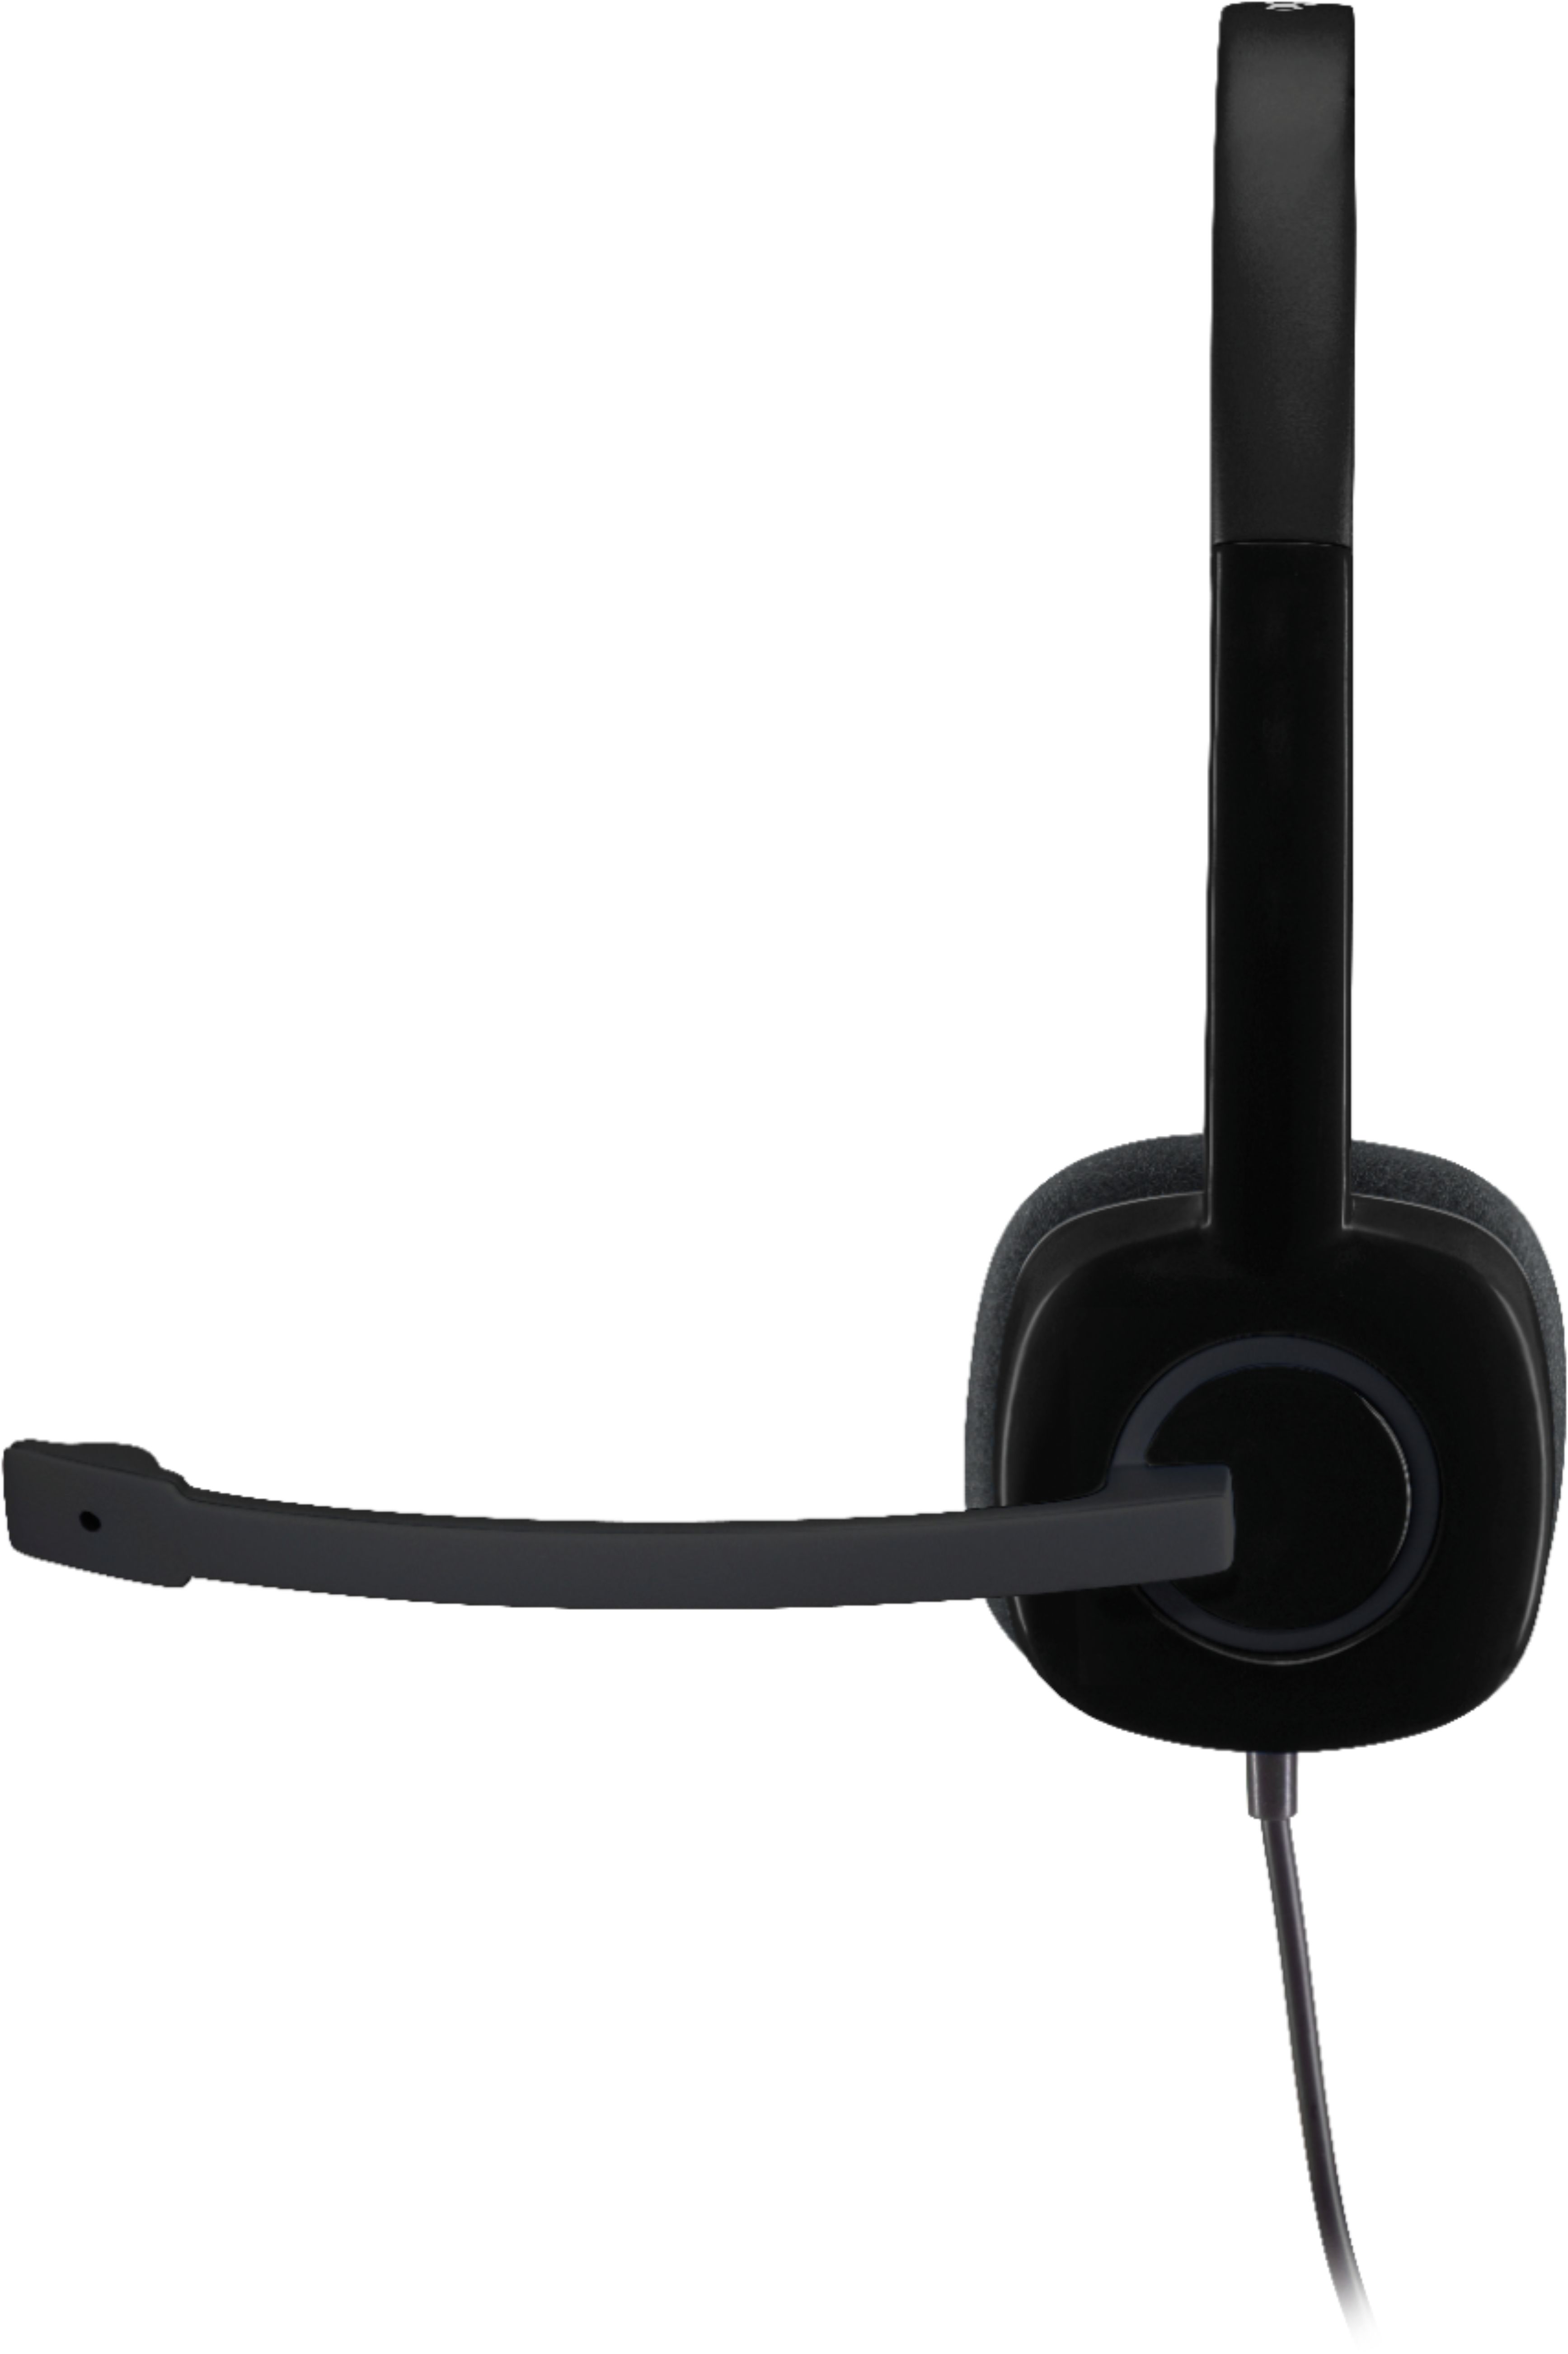 Left View: Razer - ManO'War 7.1 Wired Stereo Gaming Headset - Black